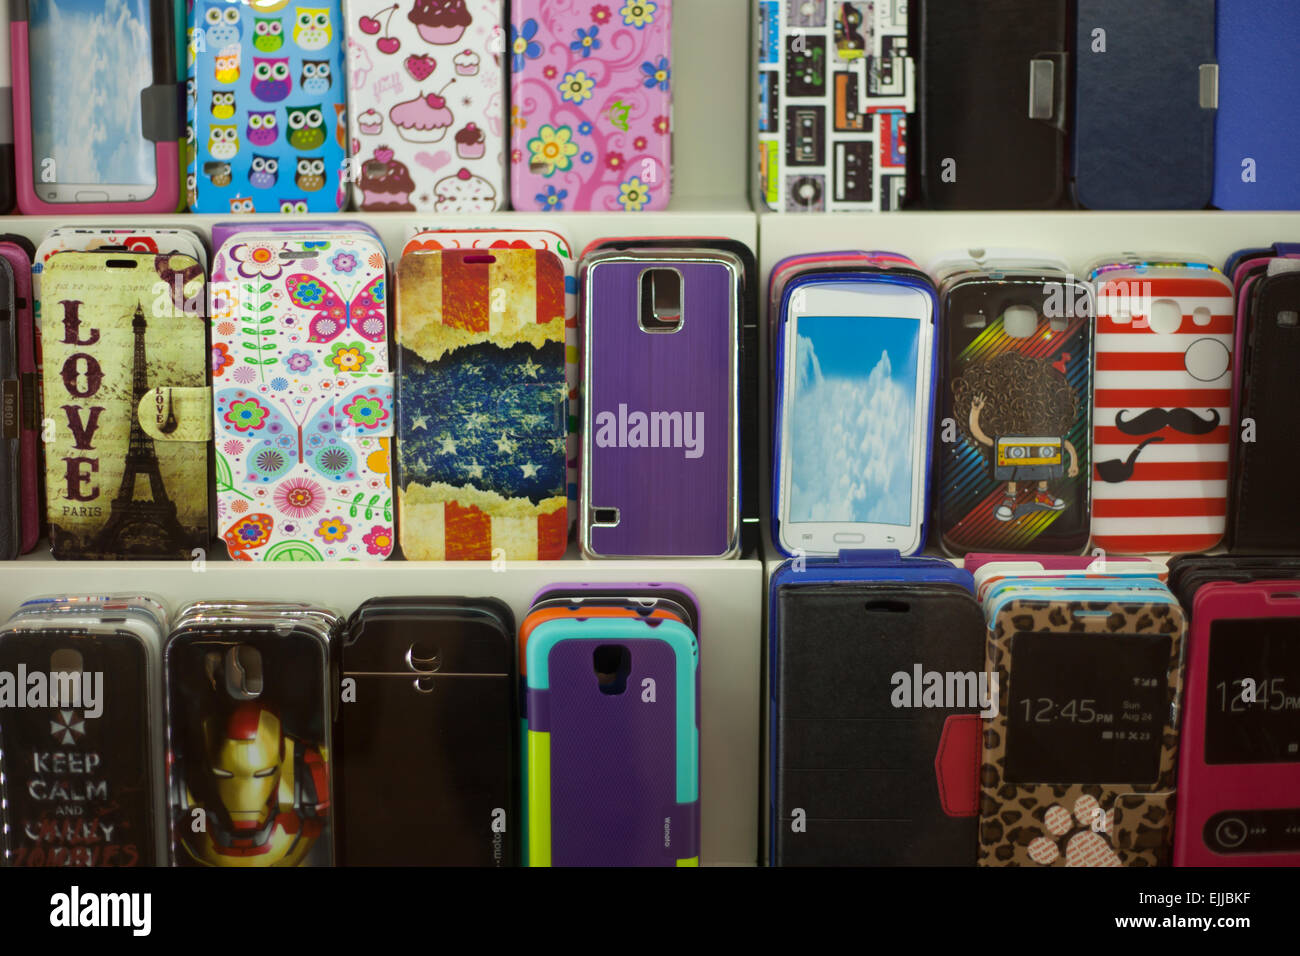 Lots of colorful designs mobile phone decals Stock Photo